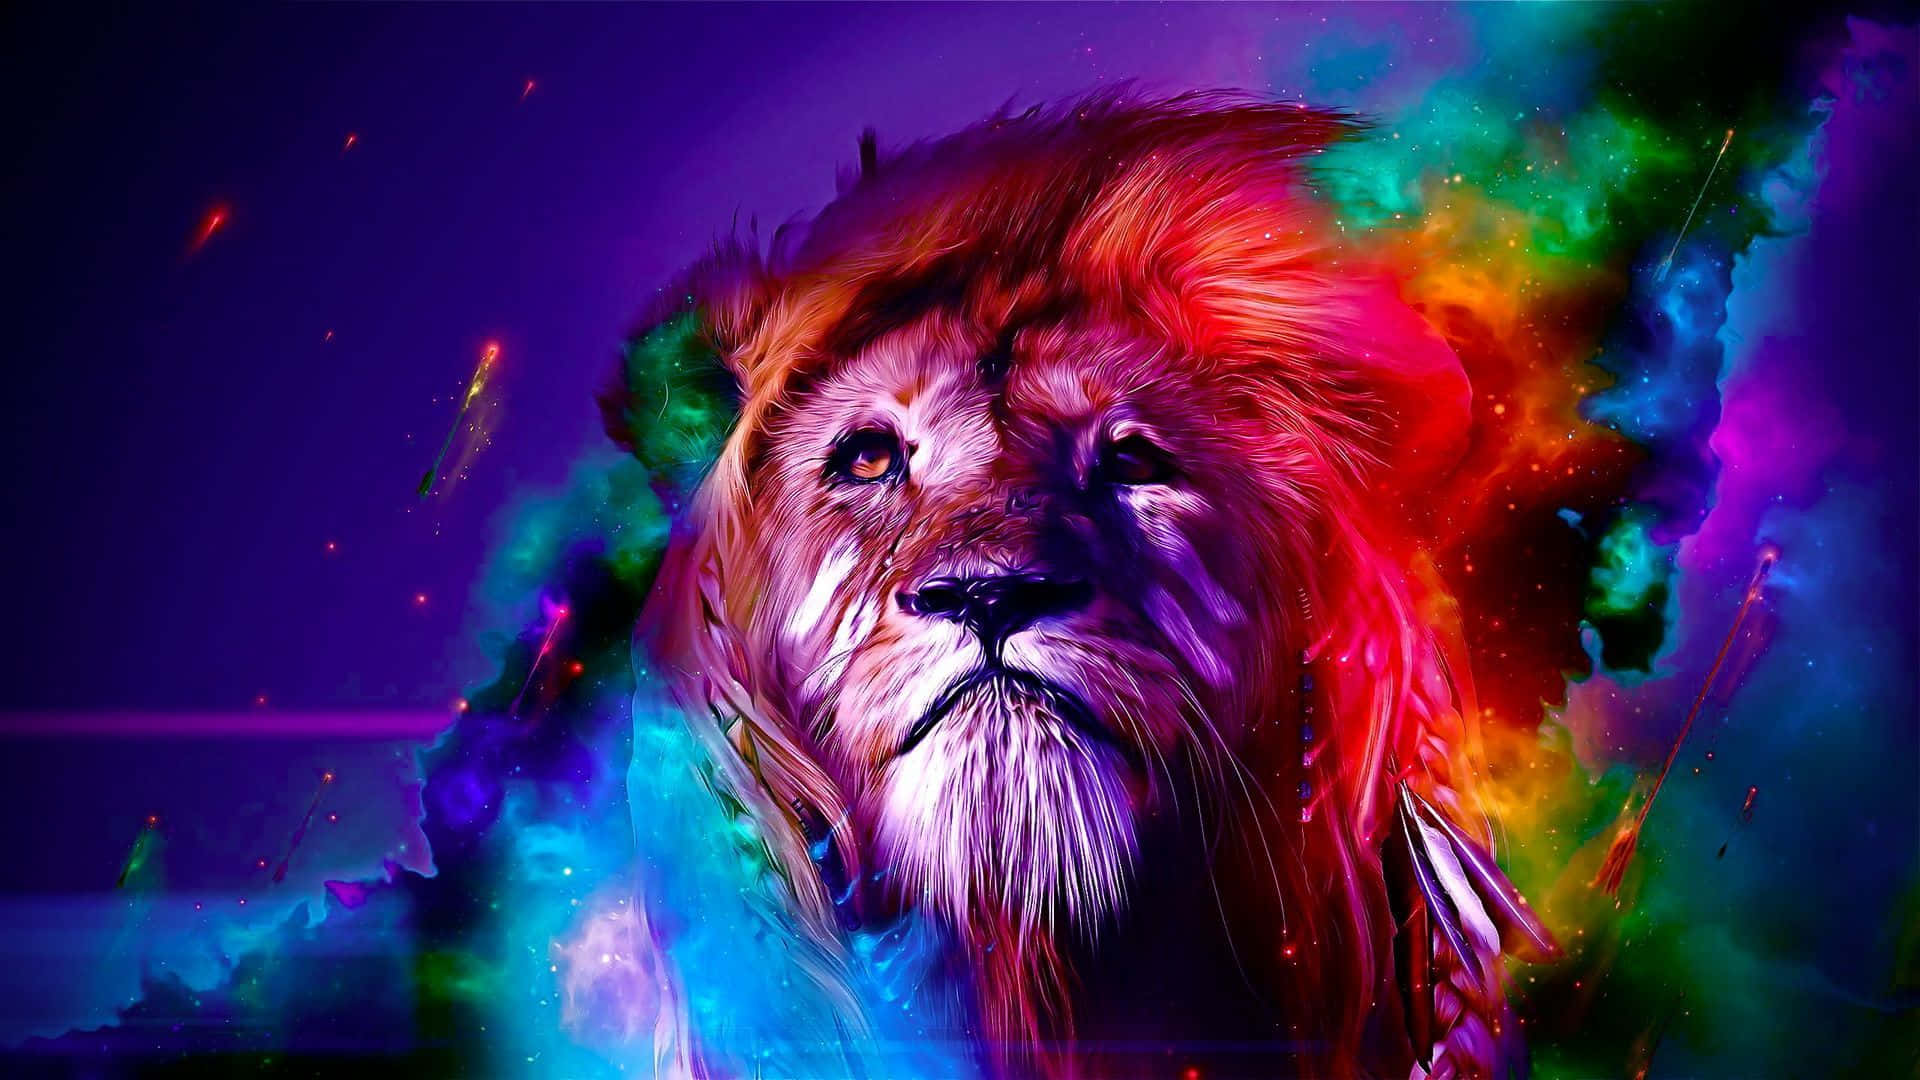 Lions Roar in the Abstract Wallpaper